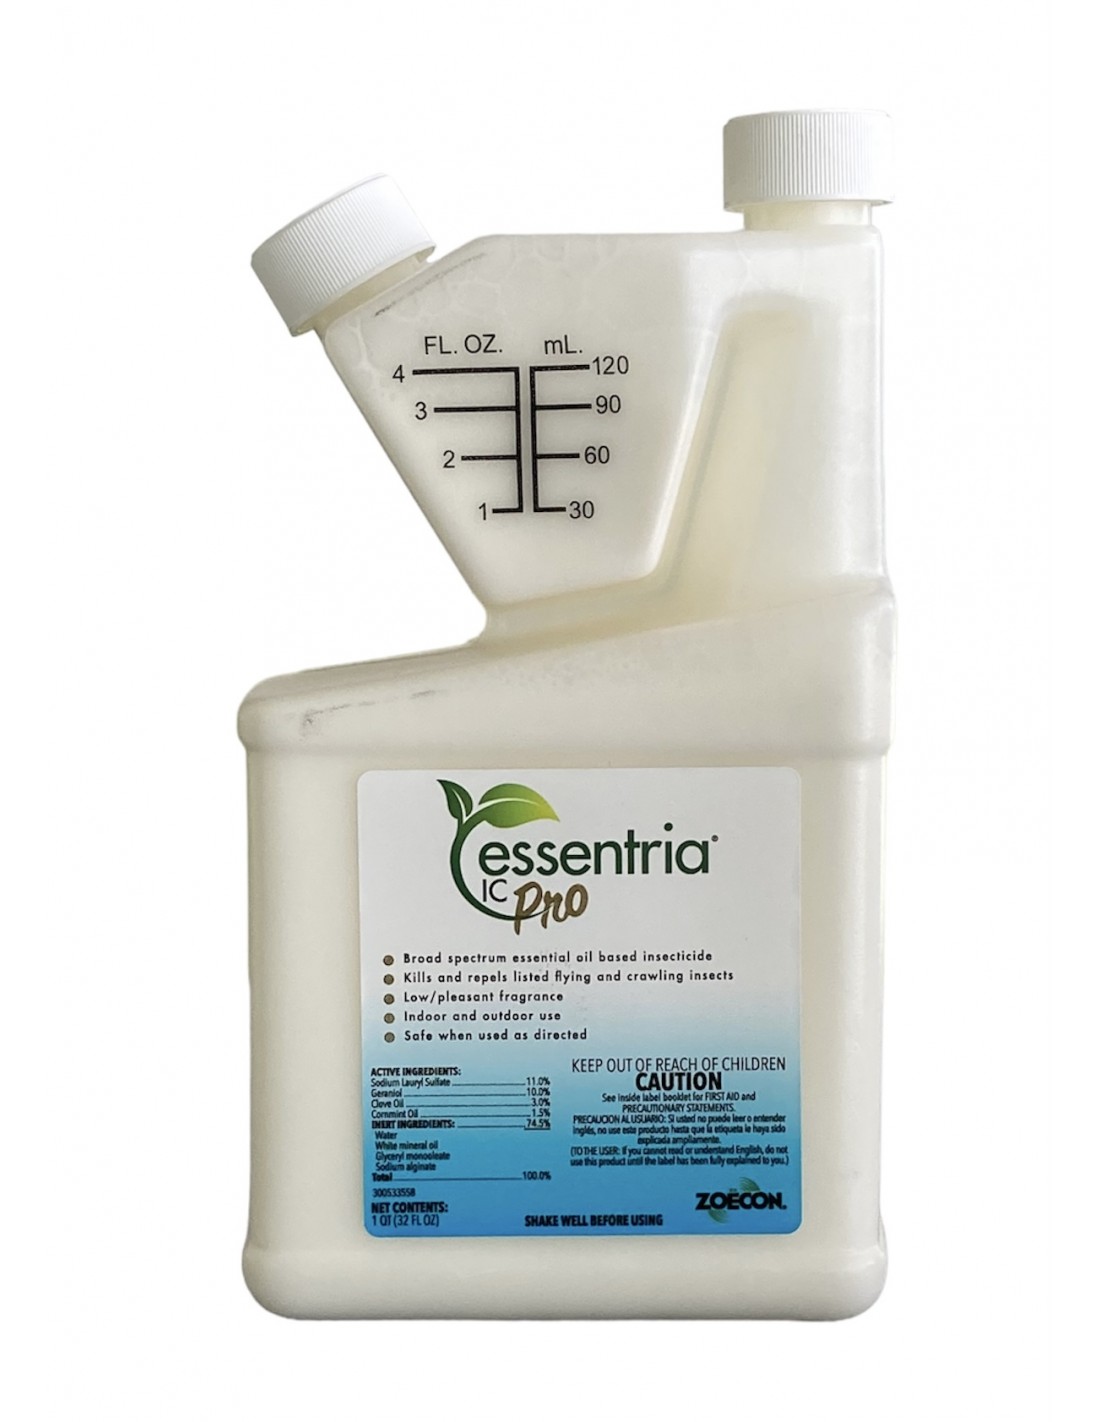 Do you have any of your products that will do the work of the essentria IC3 in NFS 60 certified?